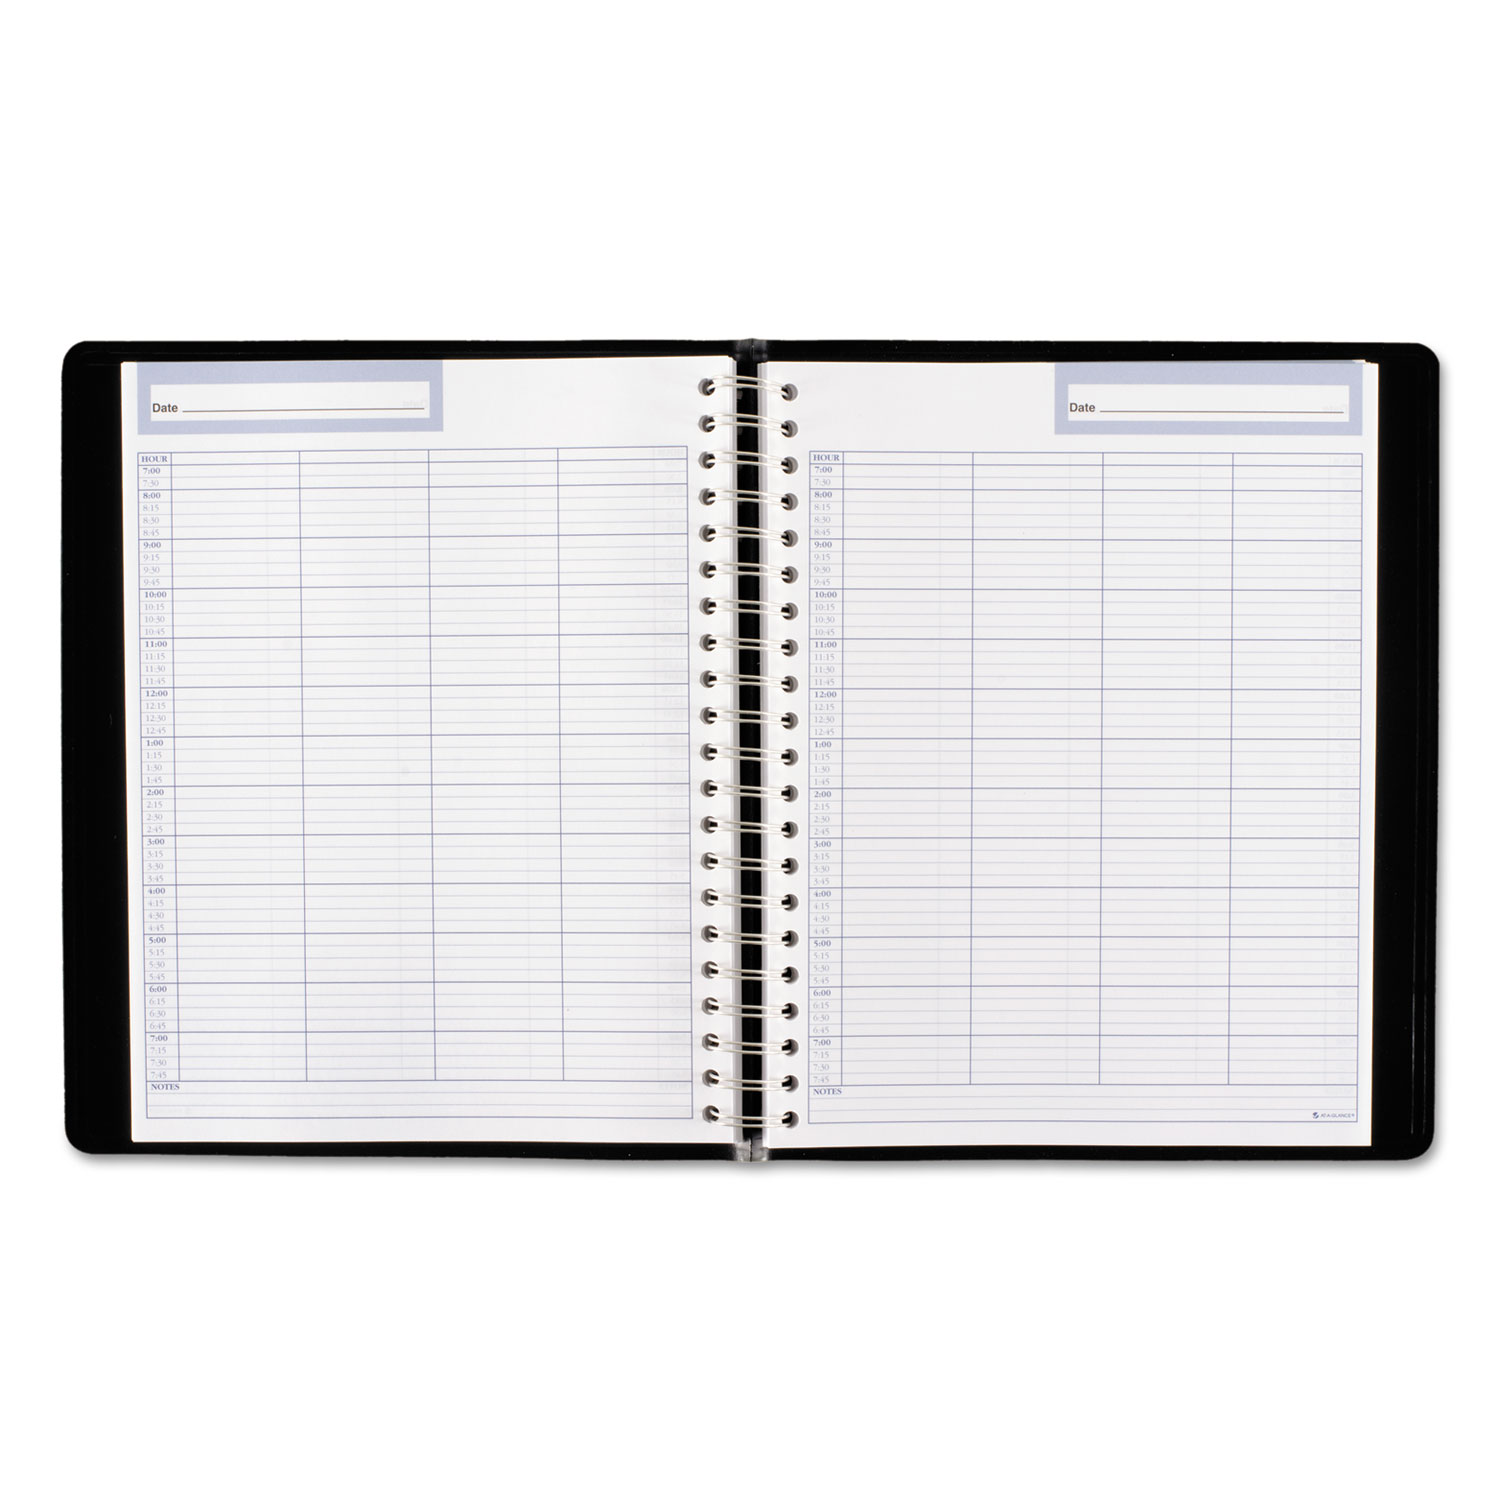 Undated Four-Person Group Daily Appointment Book, 8 1/2 x 10 7/8, Black, 2018